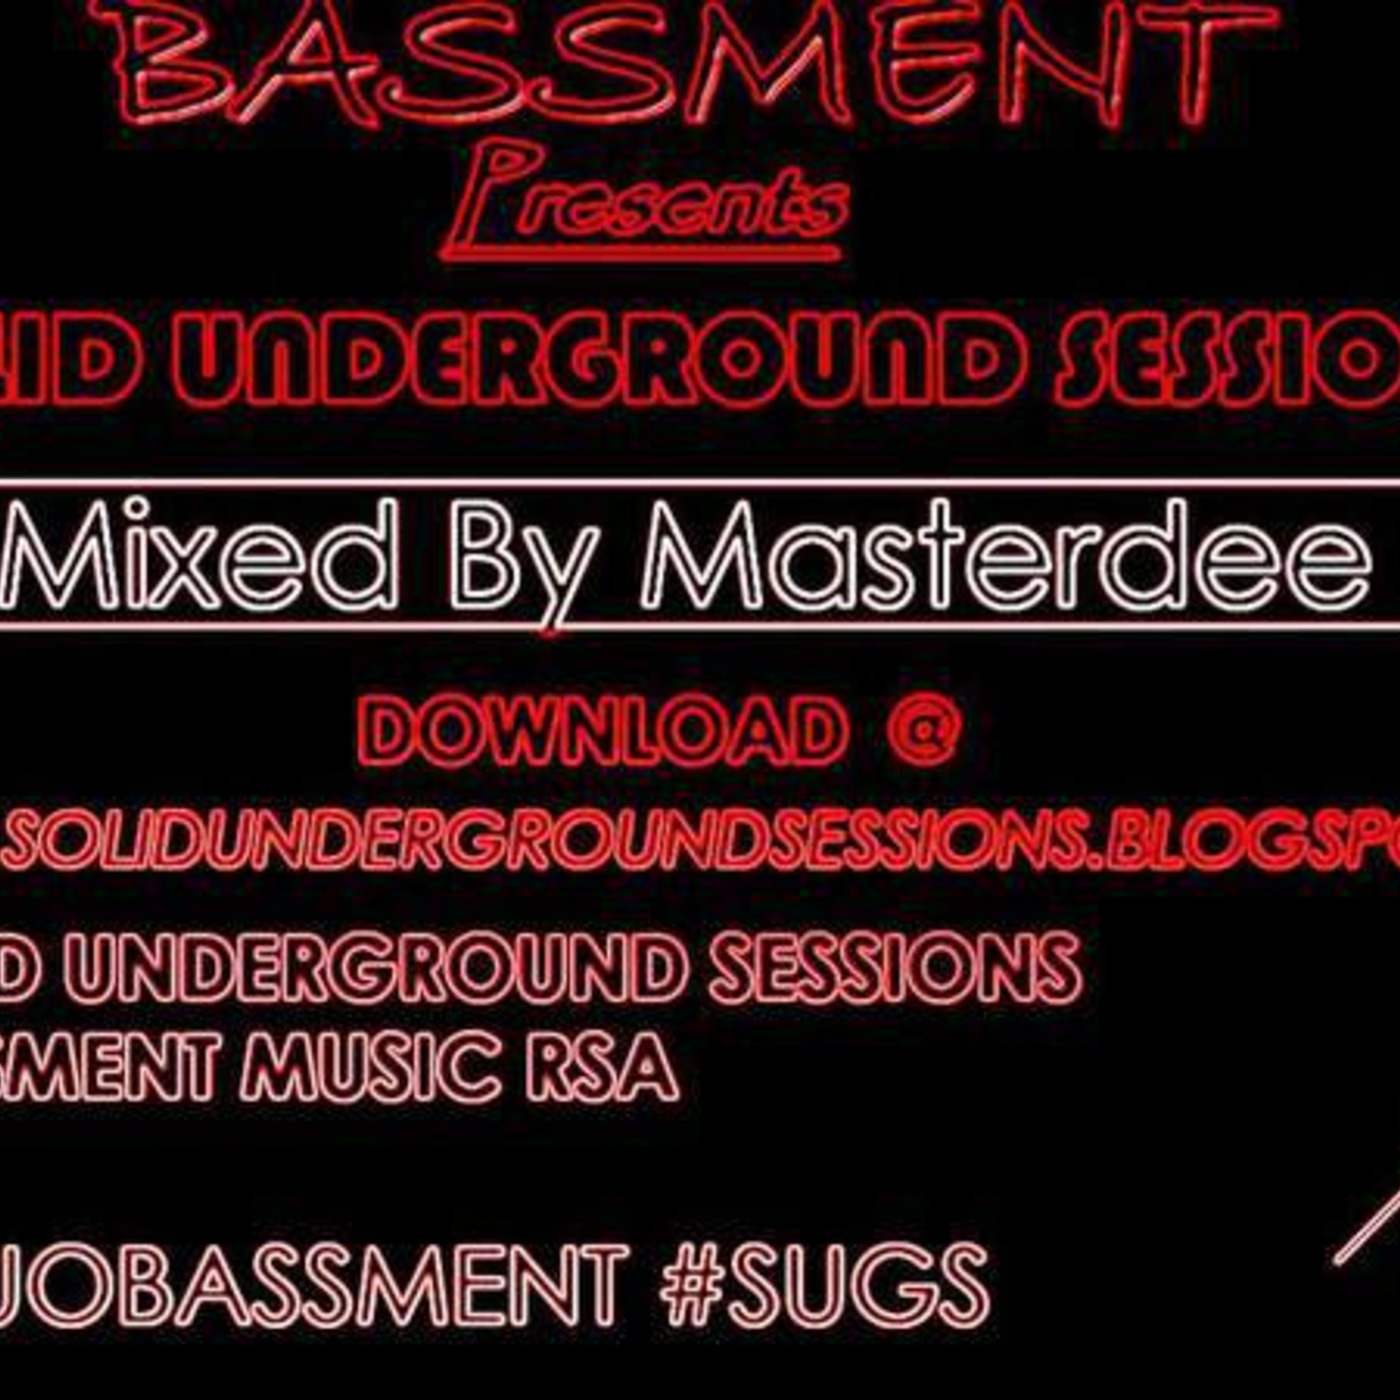 #6 Mixed By Masterdee #SUGS